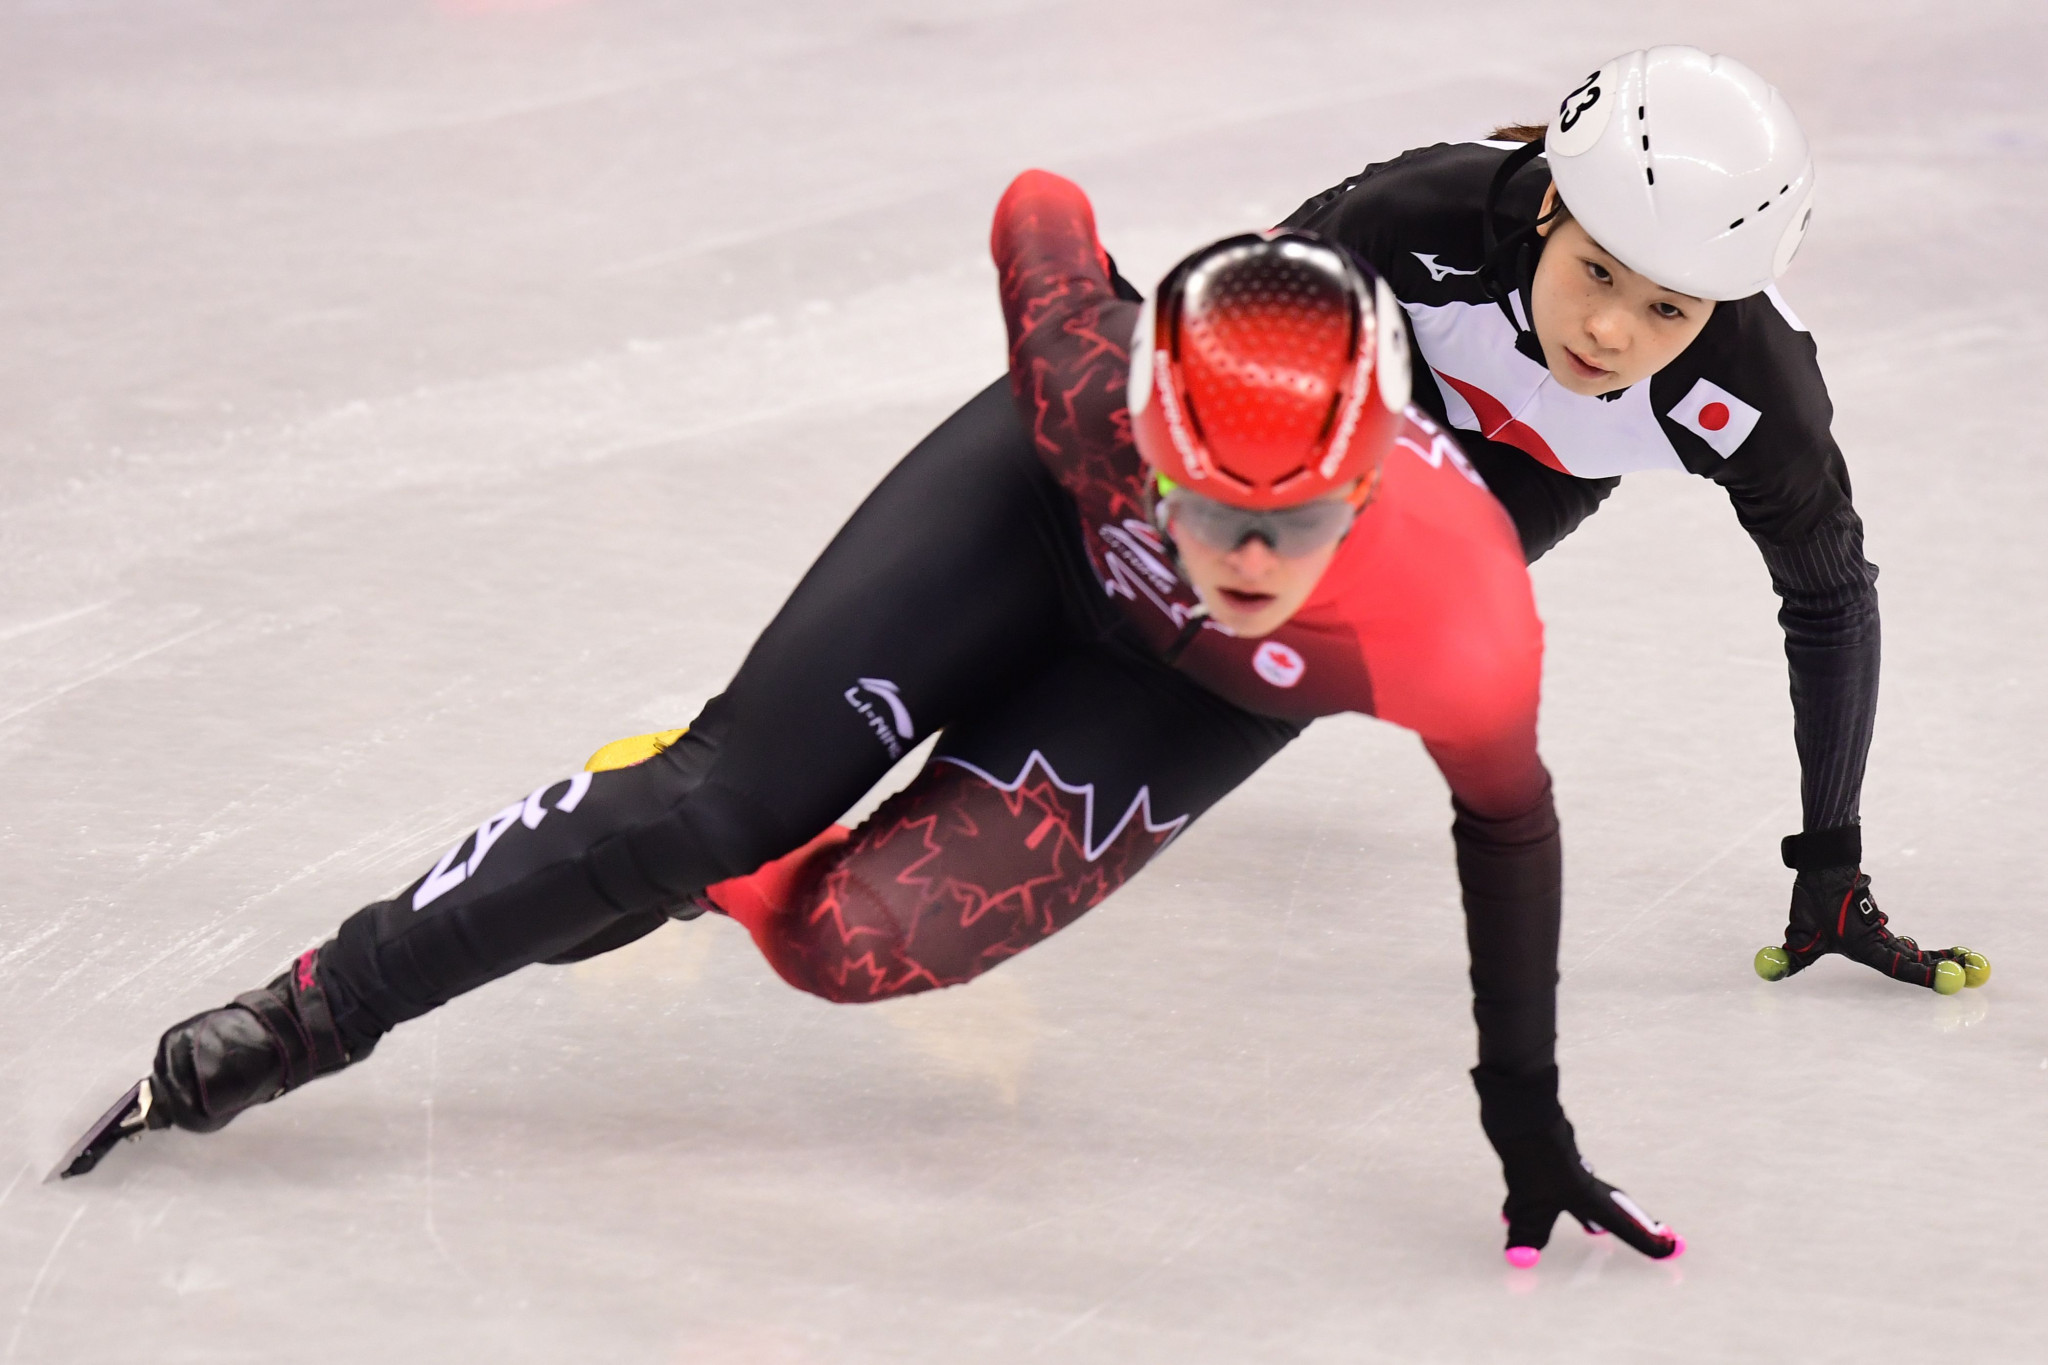 Canada's Kim Boutin continued her excellent form by reaching the 500 metres quarter-finals at the ISU Short Track World Cup in Shanghai ©Getty Images